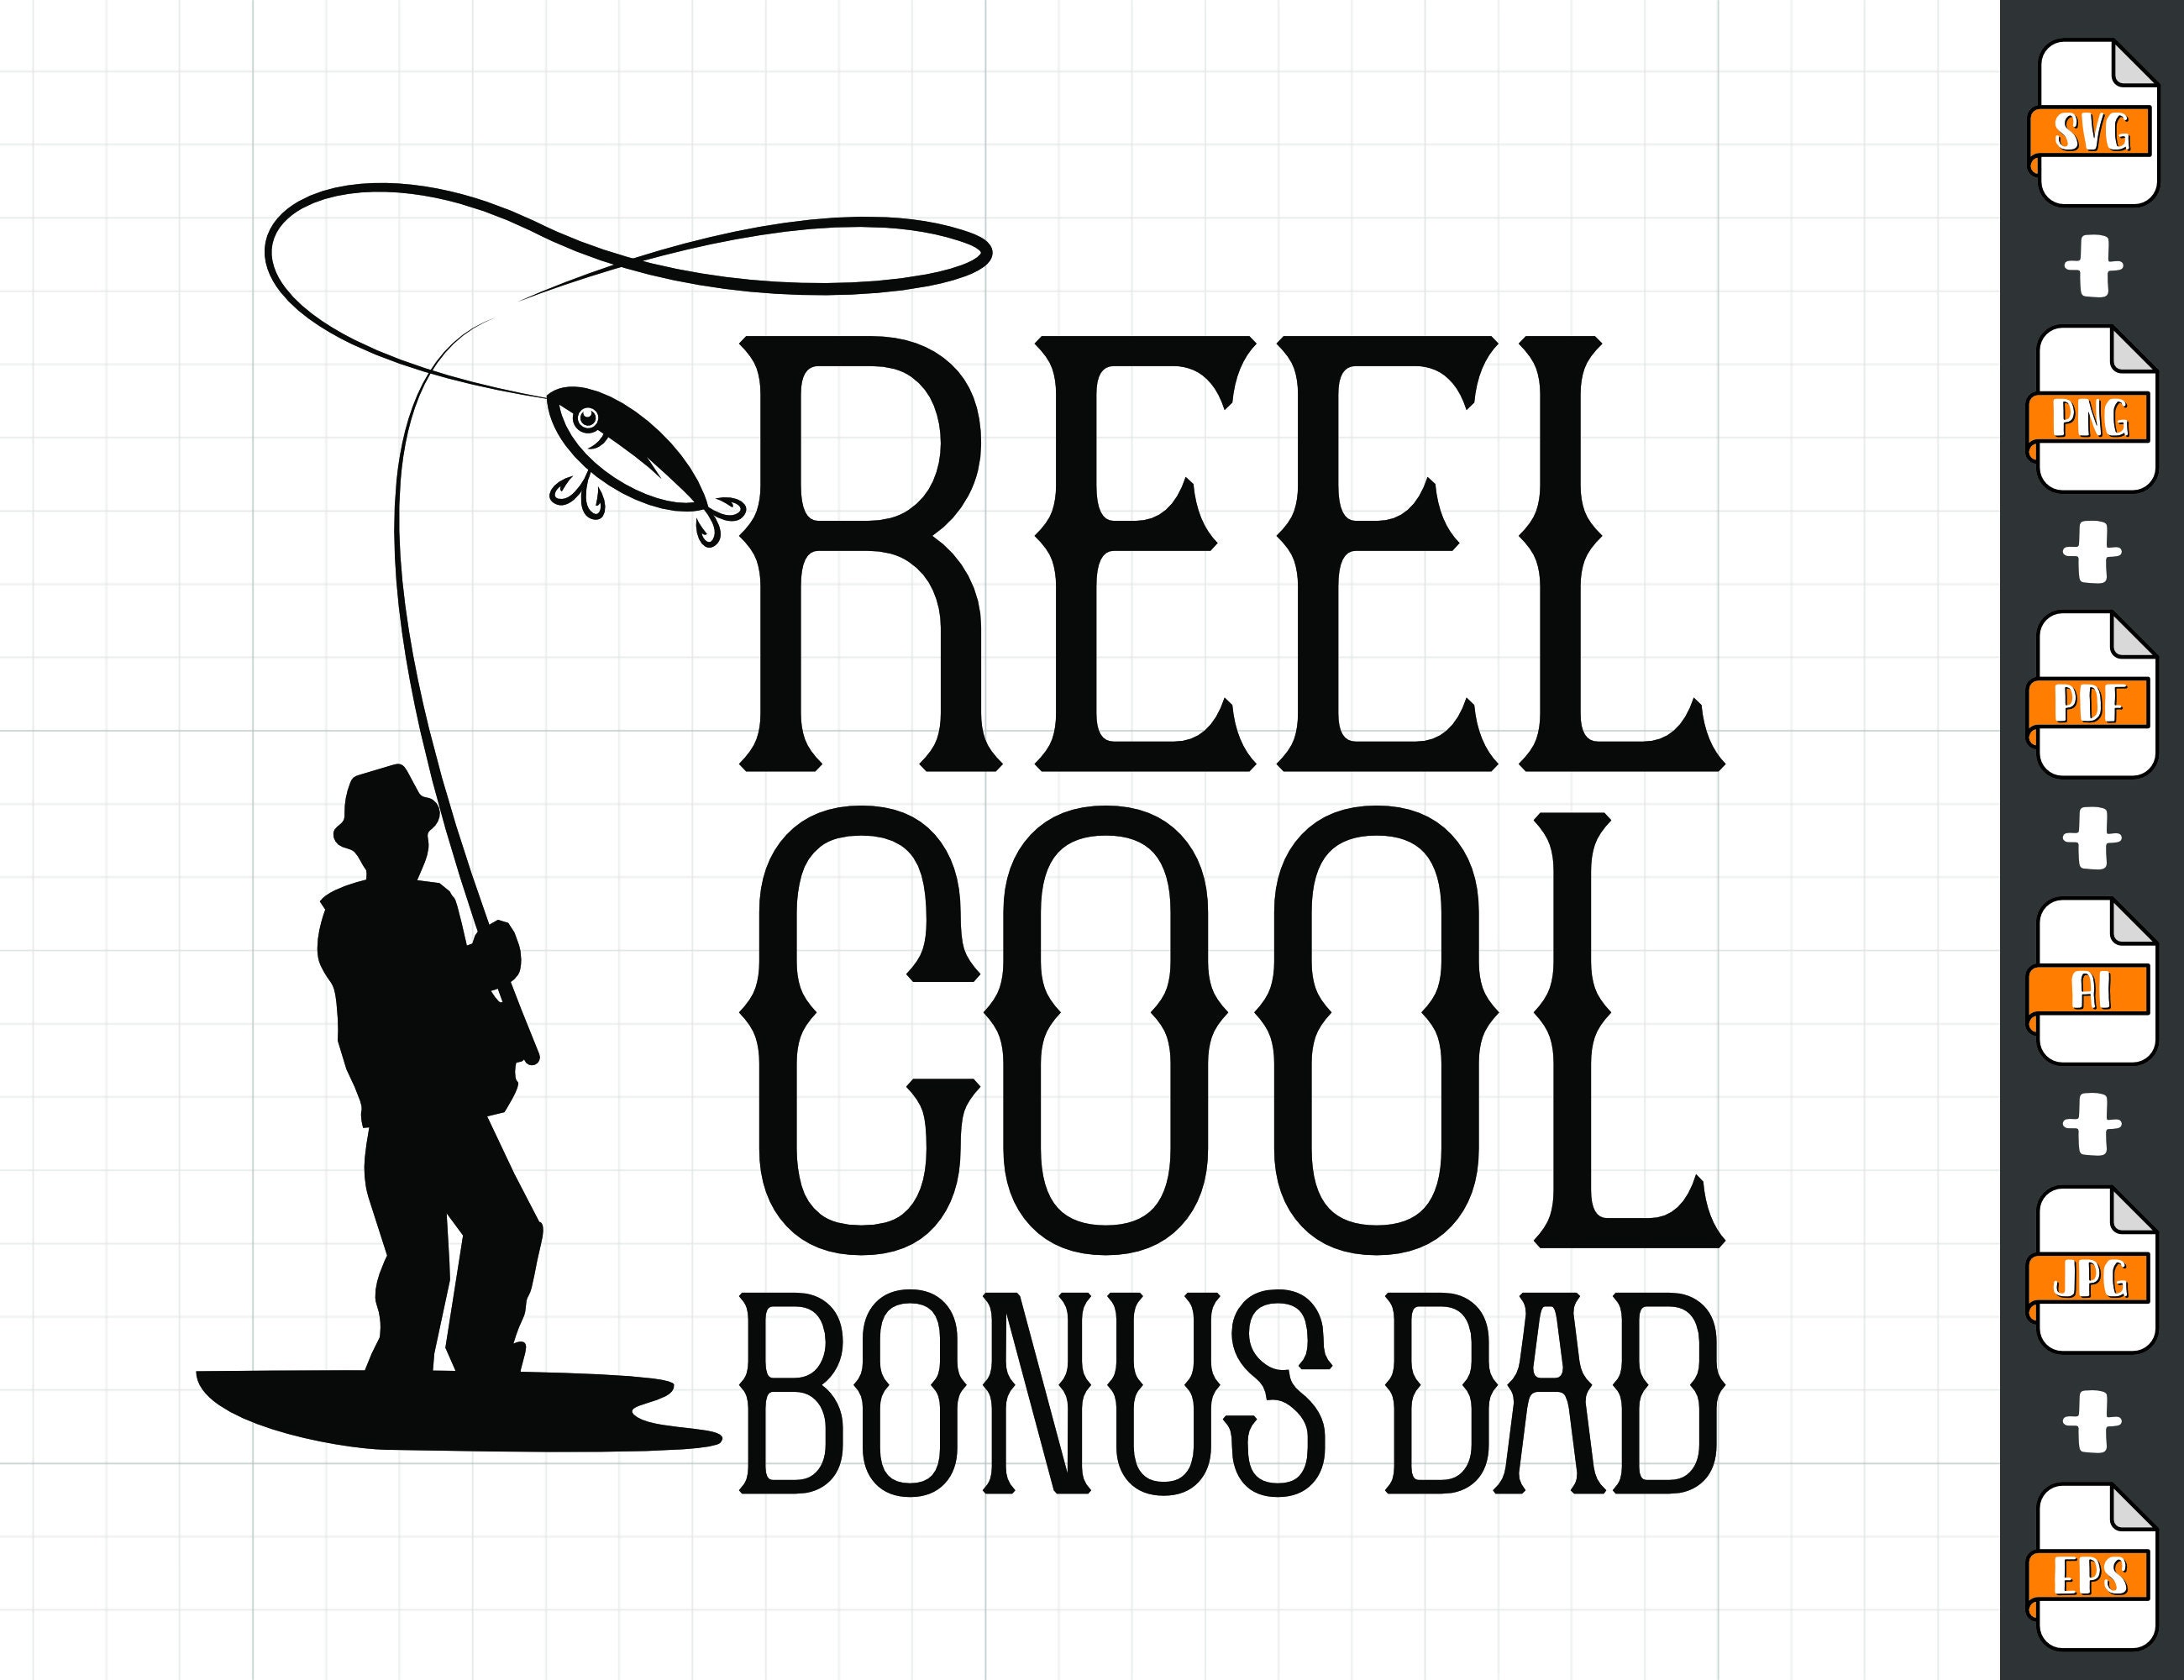 Step Dad Gifts Fathers Day Present Hooked The Best Bonus Dad Love You So  Much Fishing Lure Gifts for Stepfather Bonus Dad Thanksgiving Christmas